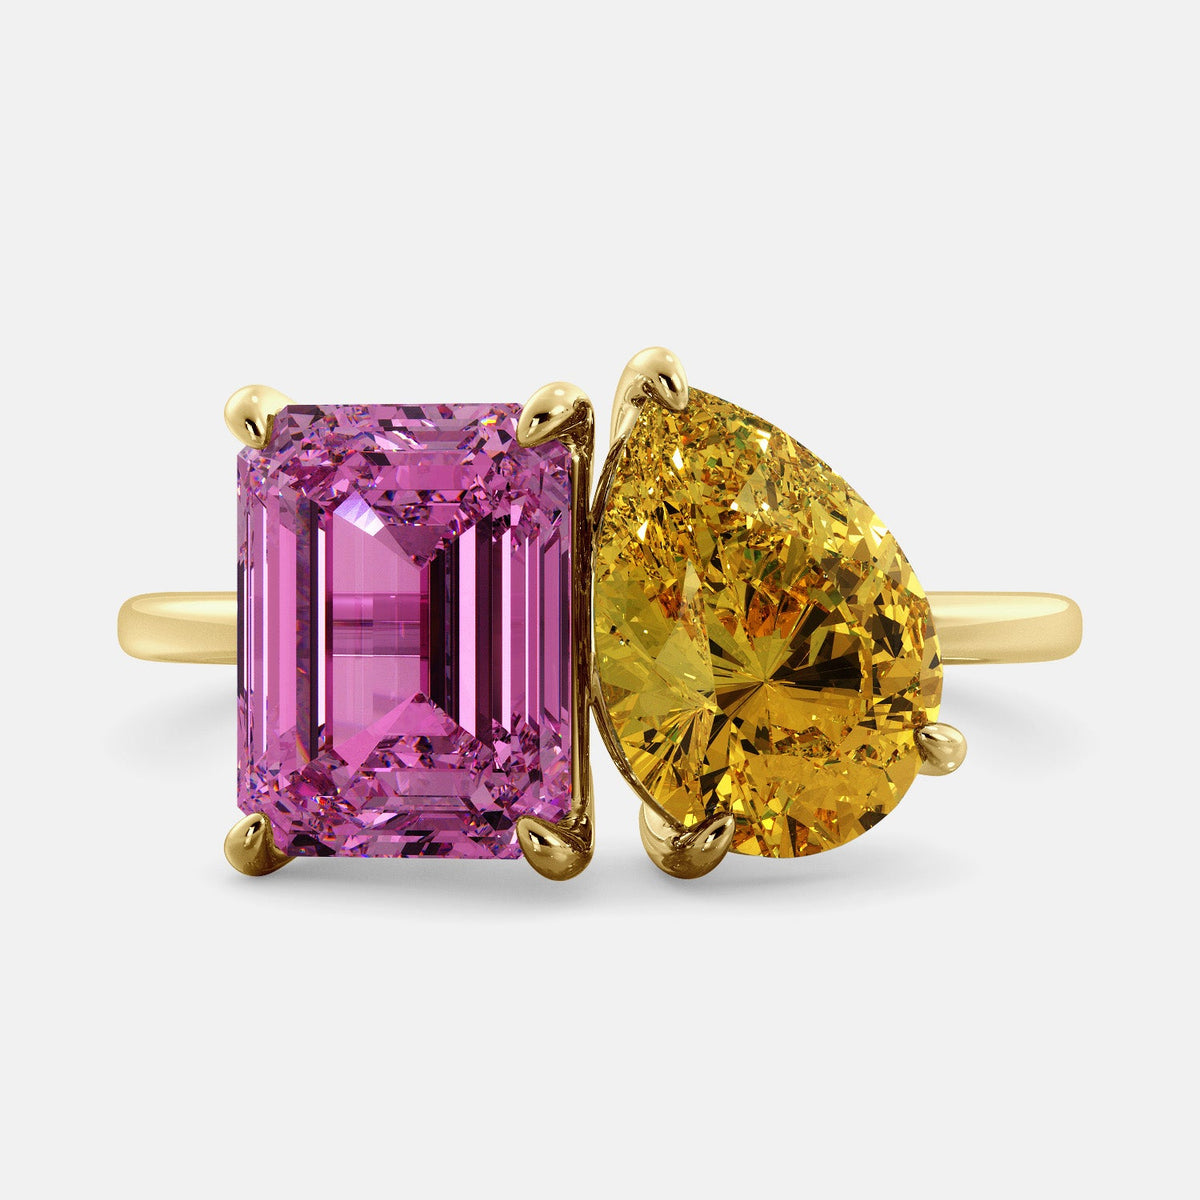 A toi et moi ring with an emerald-cut Pink Sapphire and pear-cut gemstone. The emerald-cut morganite is set on the left of the ring, and the pear-cut gemstone is set on the right. The ring is made of recycled yellow gold and has a simple, elegant design. The pear-cut gemstone can be customized. **Here are some additional details about the image:** * The emerald-cut white Pink Sapphire is a birthstone for October. * The pear-cut gemstone can be customized to any stone of your choice.